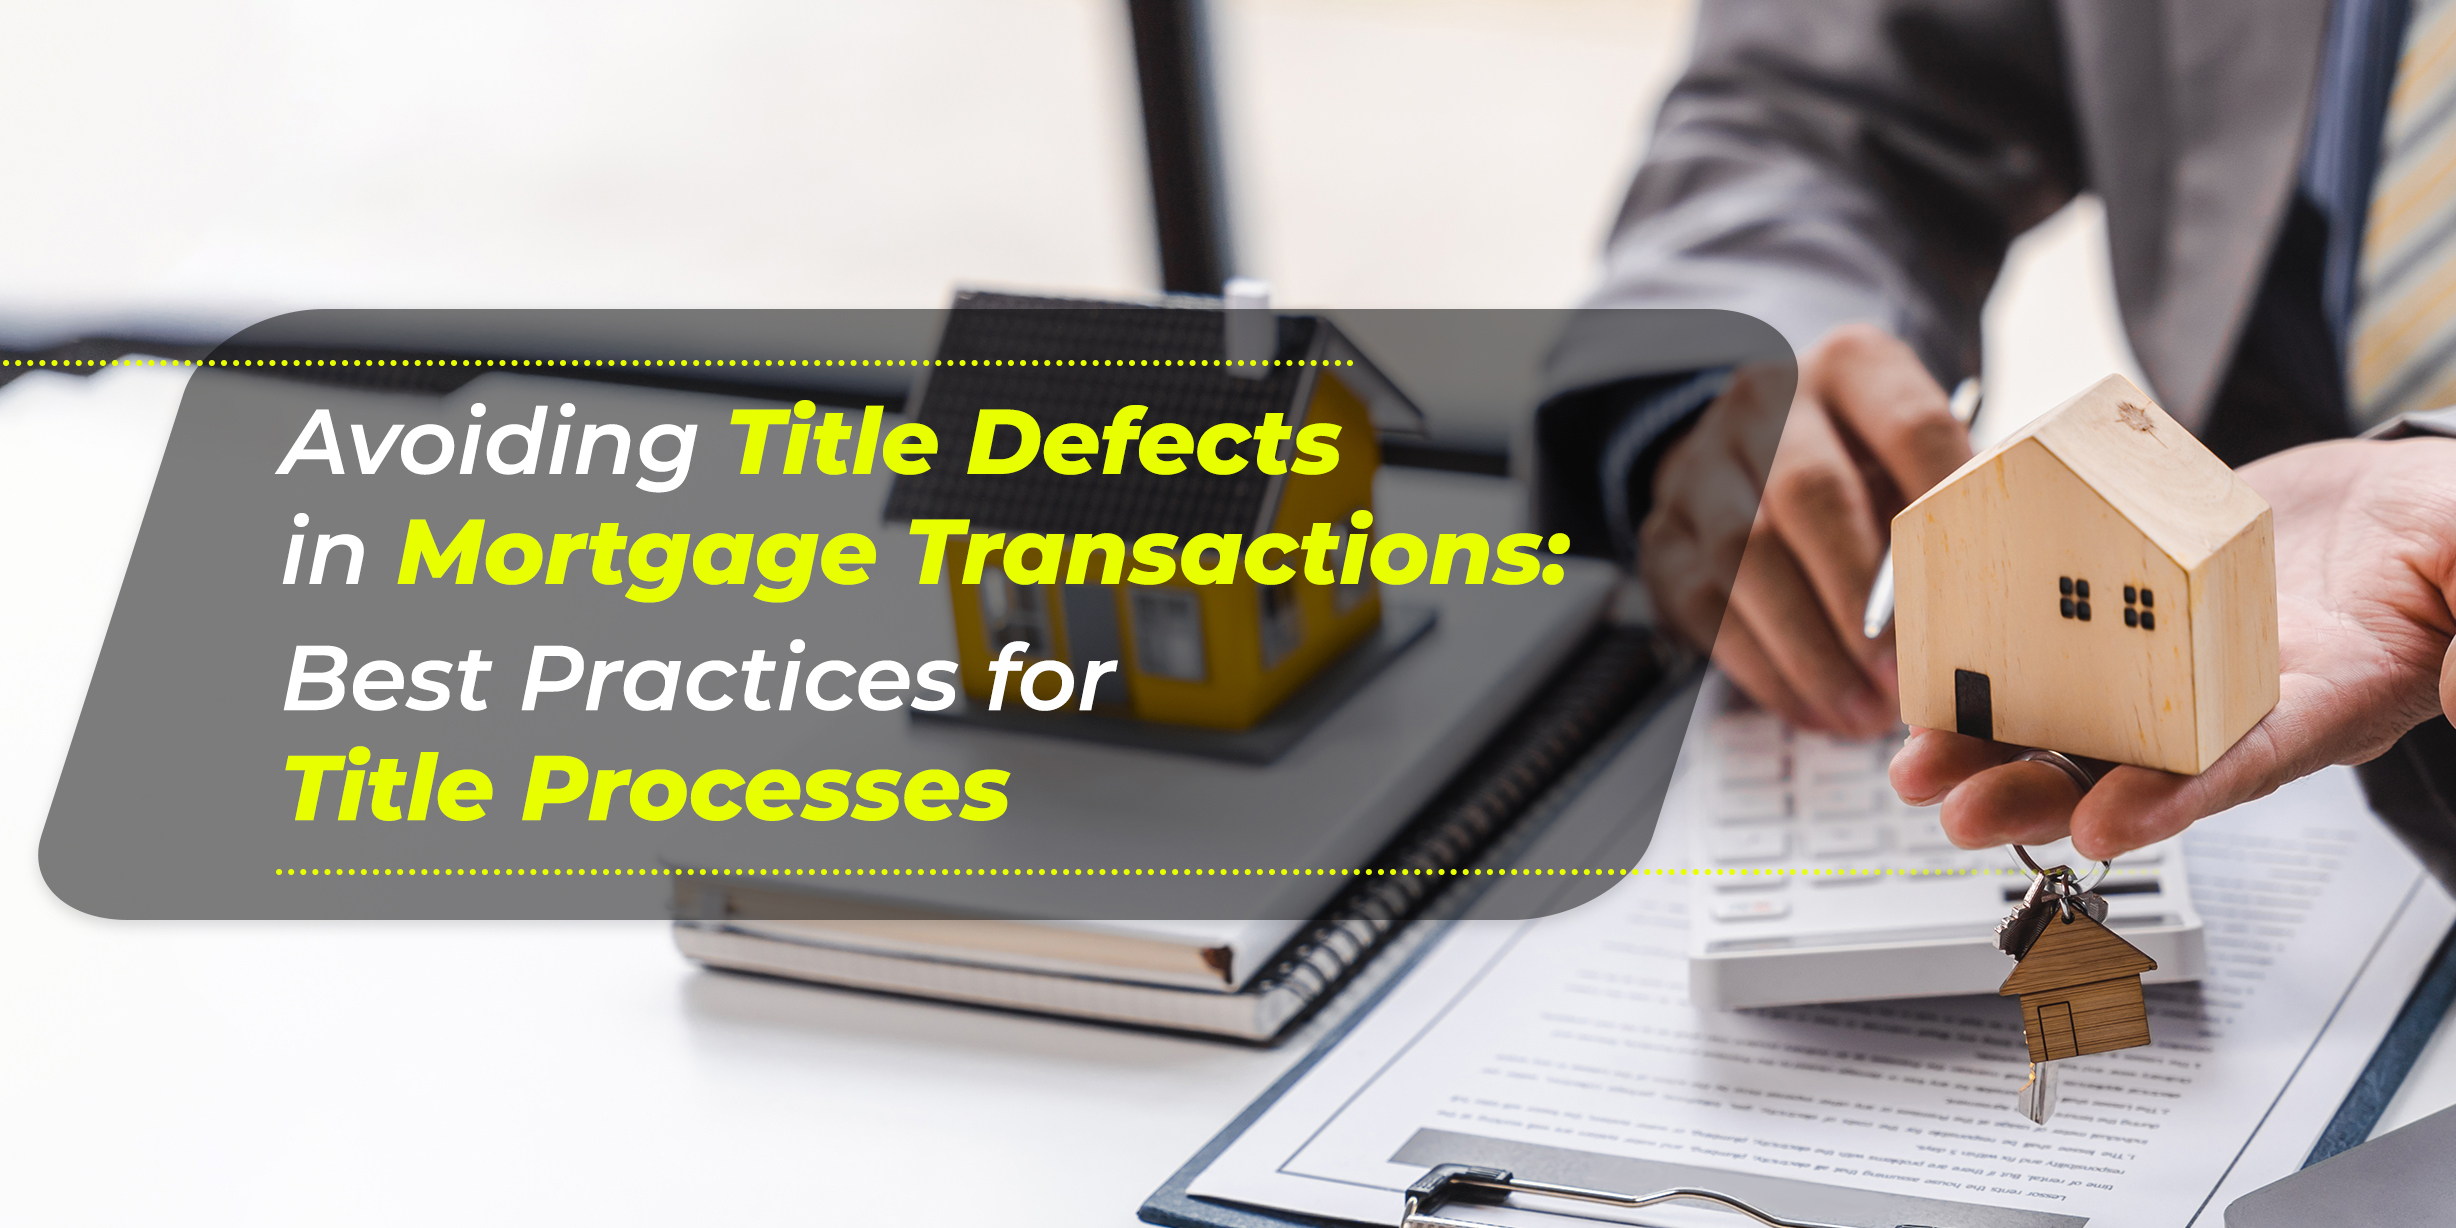 Avoiding Title Defects in Mortgage Transactions: Best Practices for Title Processes